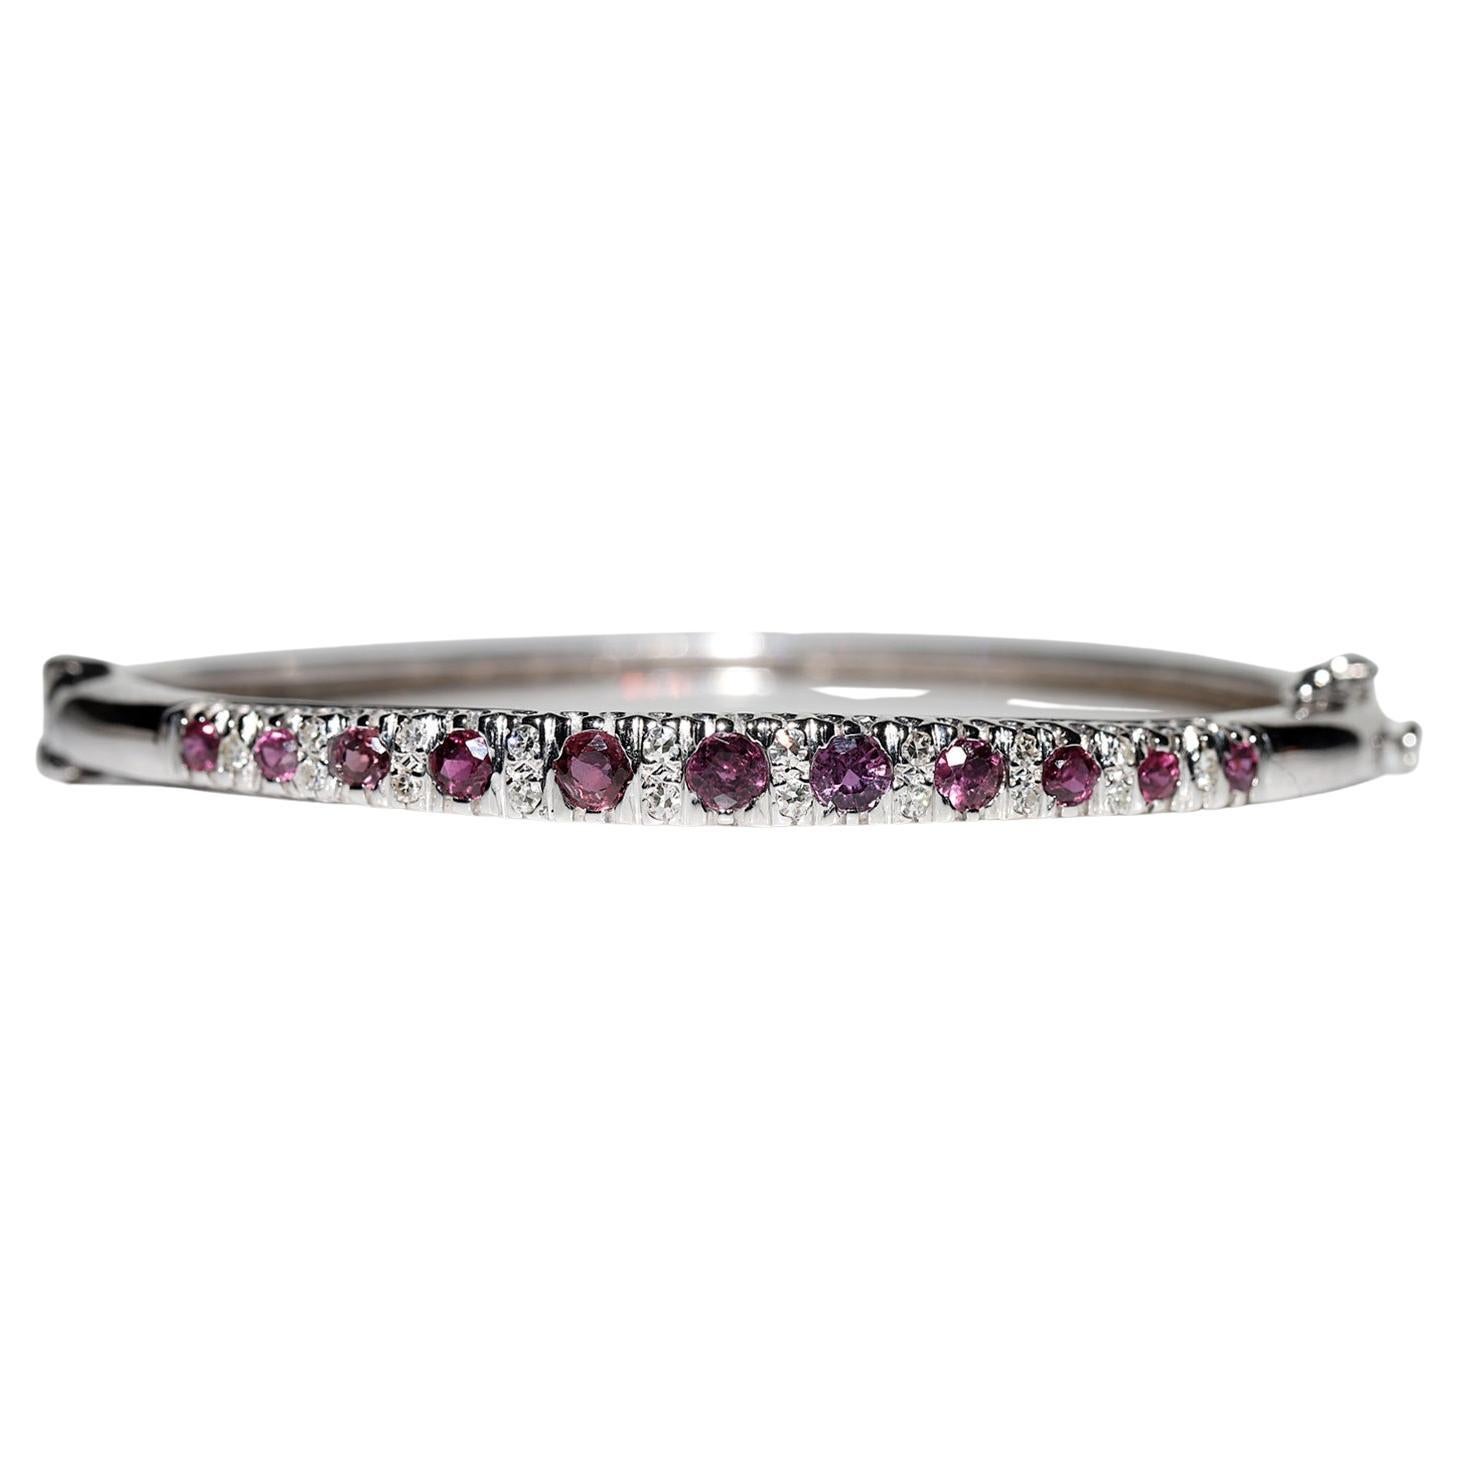 Vintage Circa 1980s 14k Gold Natural Diamond And Ruby Decorated Bangle Bracelet  For Sale